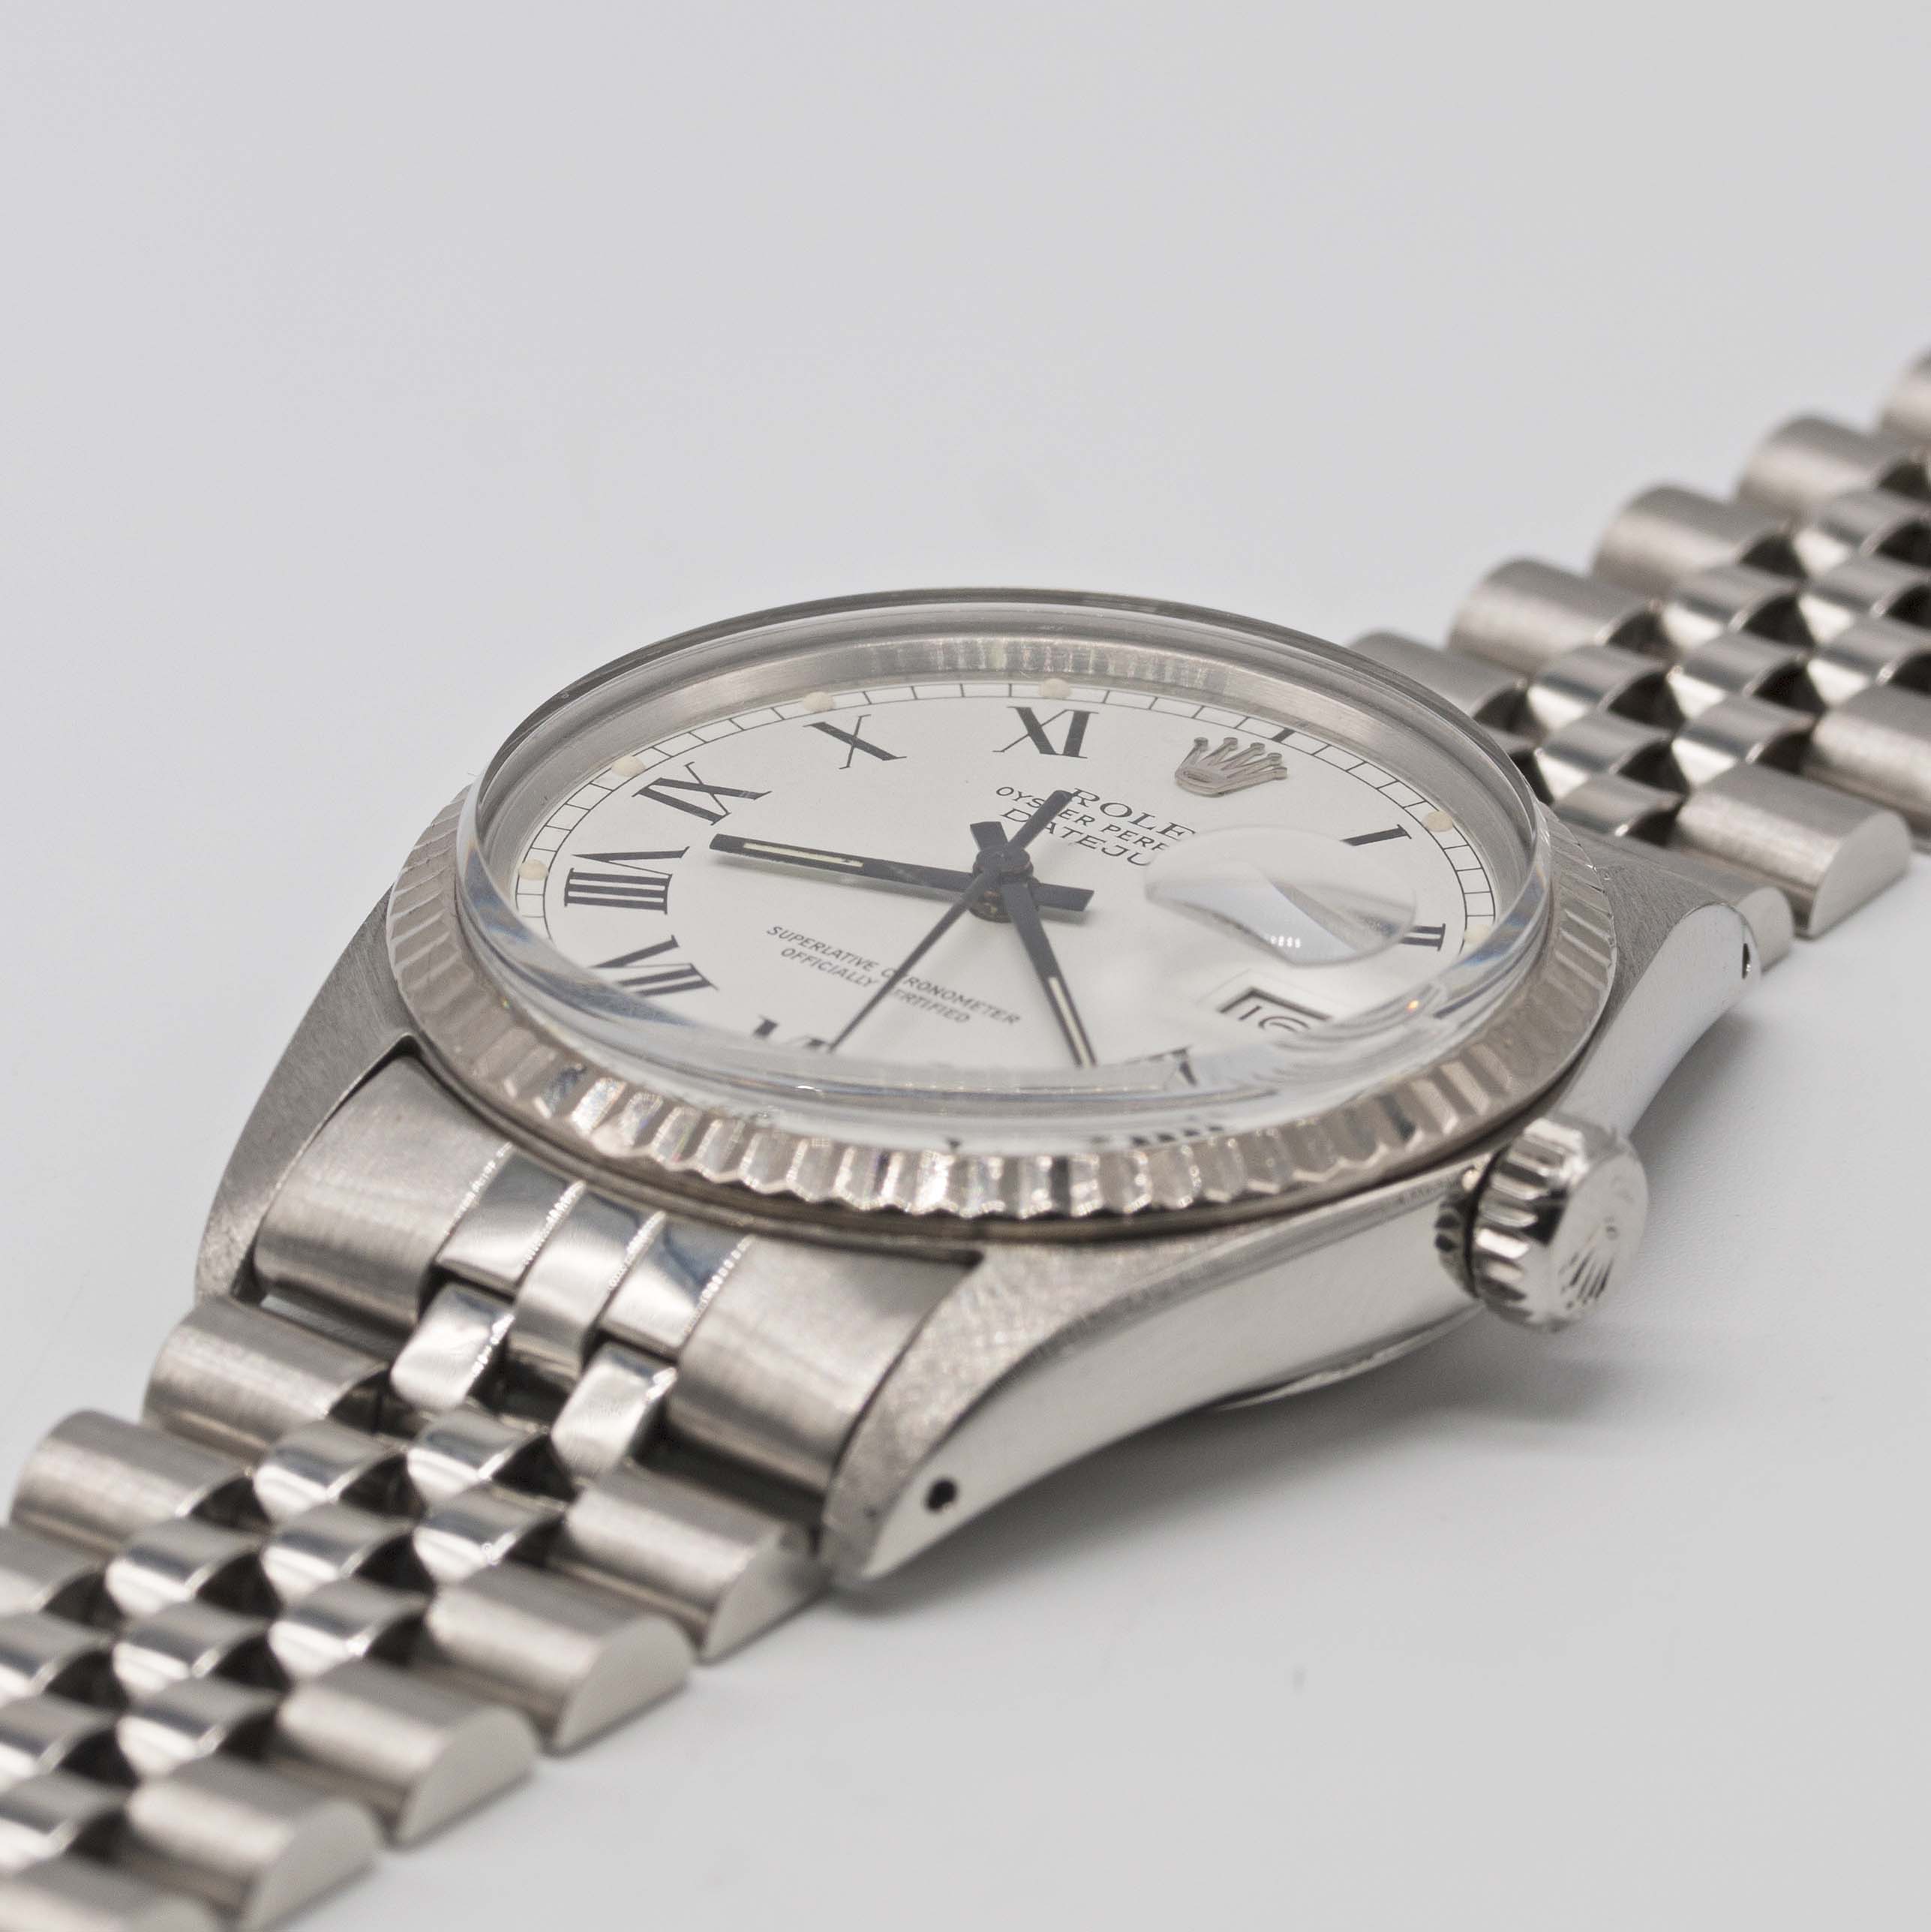 A GENTLEMAN'S STEEL & WHITE GOLD ROLEX OYSTER PERPETUAL DATEJUST BRACELET WATCH CIRCA 1984, REF. - Image 3 of 11